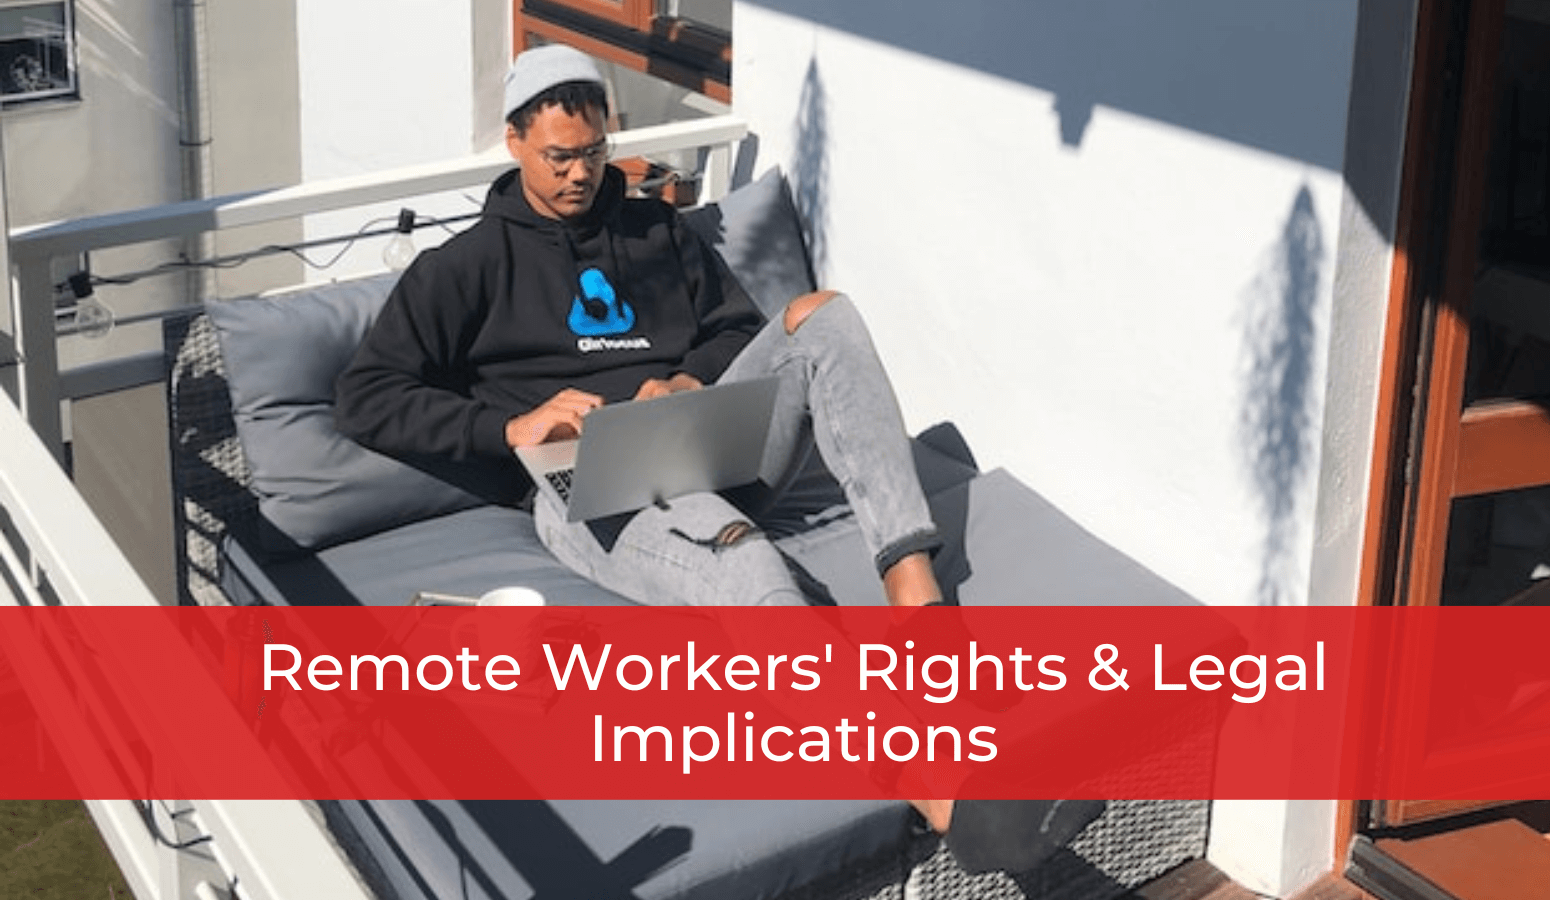 Featured image for “Remote Workers’ Rights & Legal Implications”